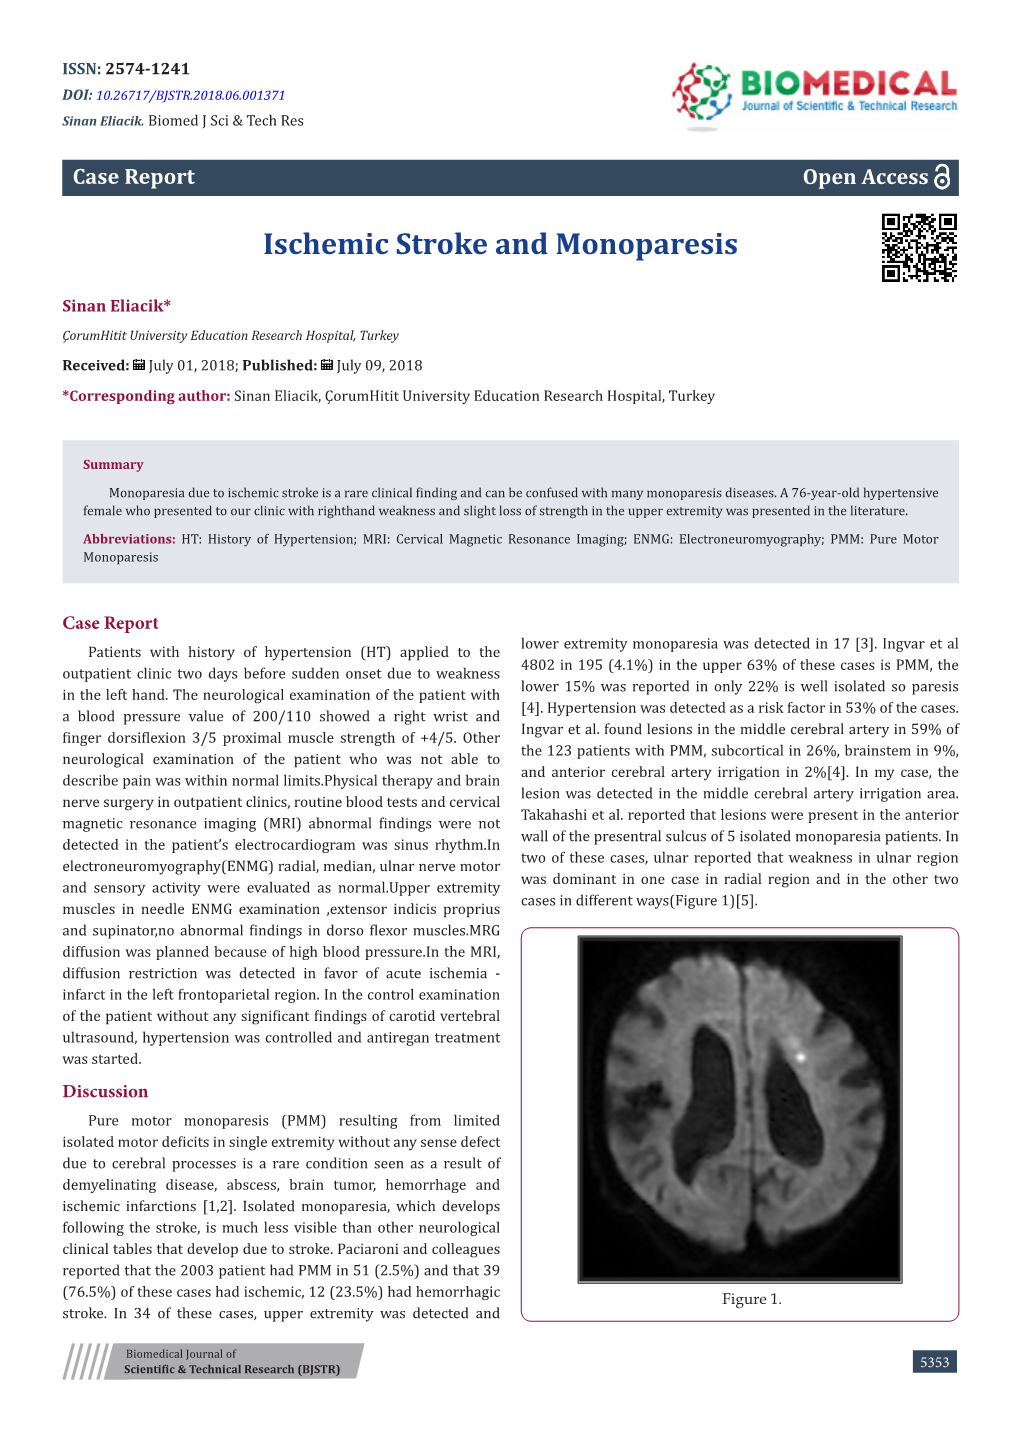 Ischemic Stroke and Monoparesis